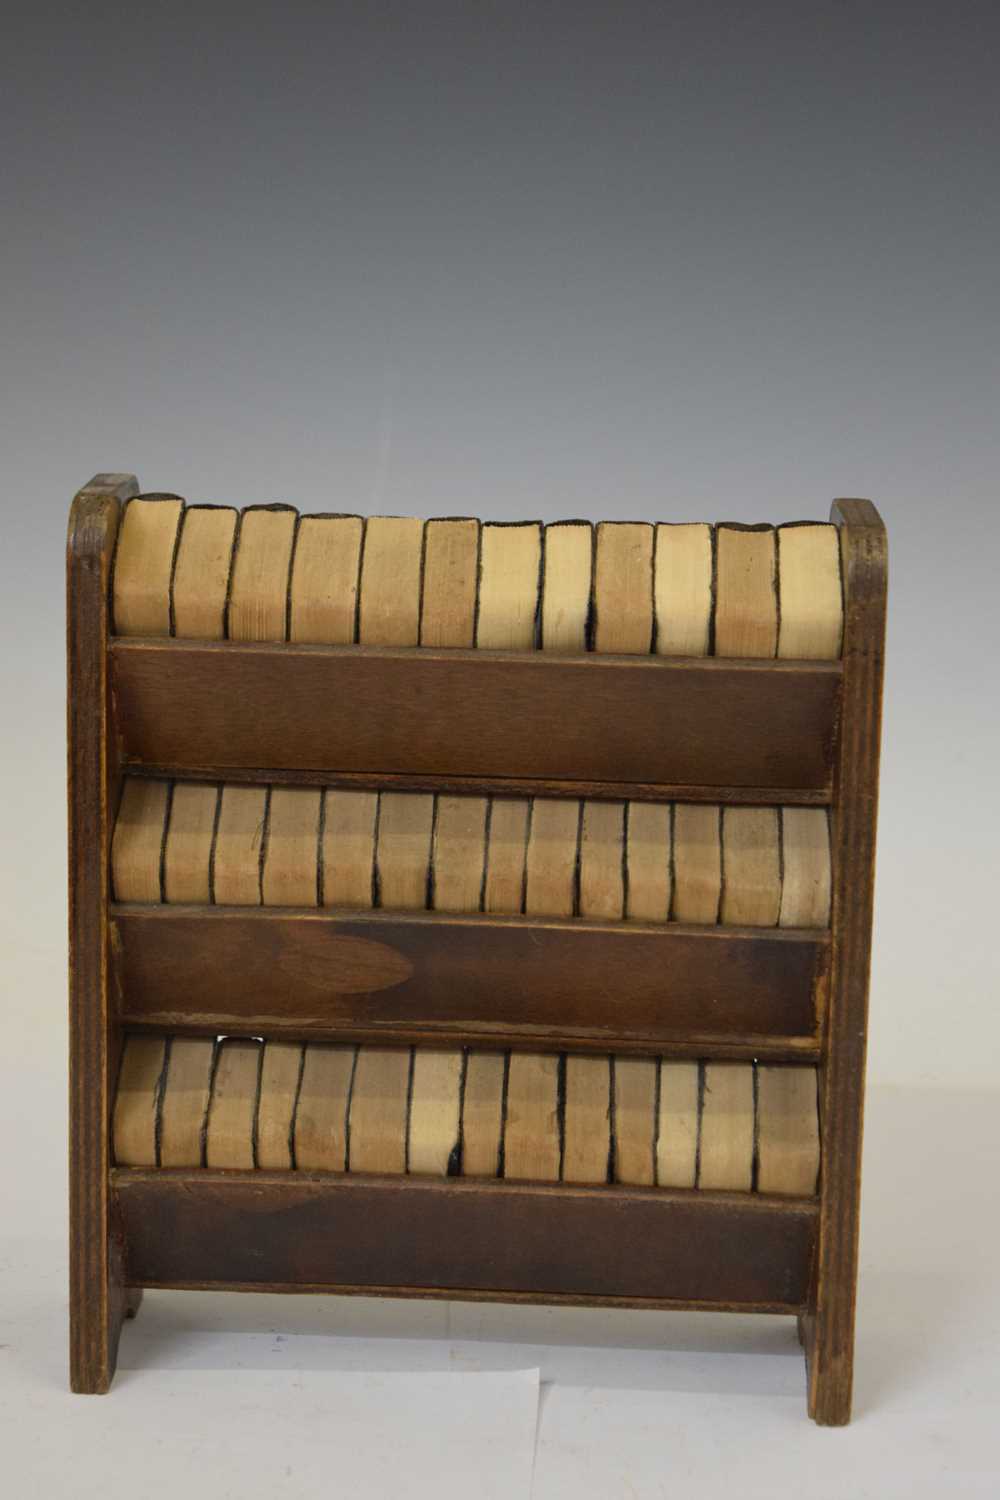 Works of William Shakespeare forty miniature volumes with miniature bookcase, circa 1930 - Image 5 of 7